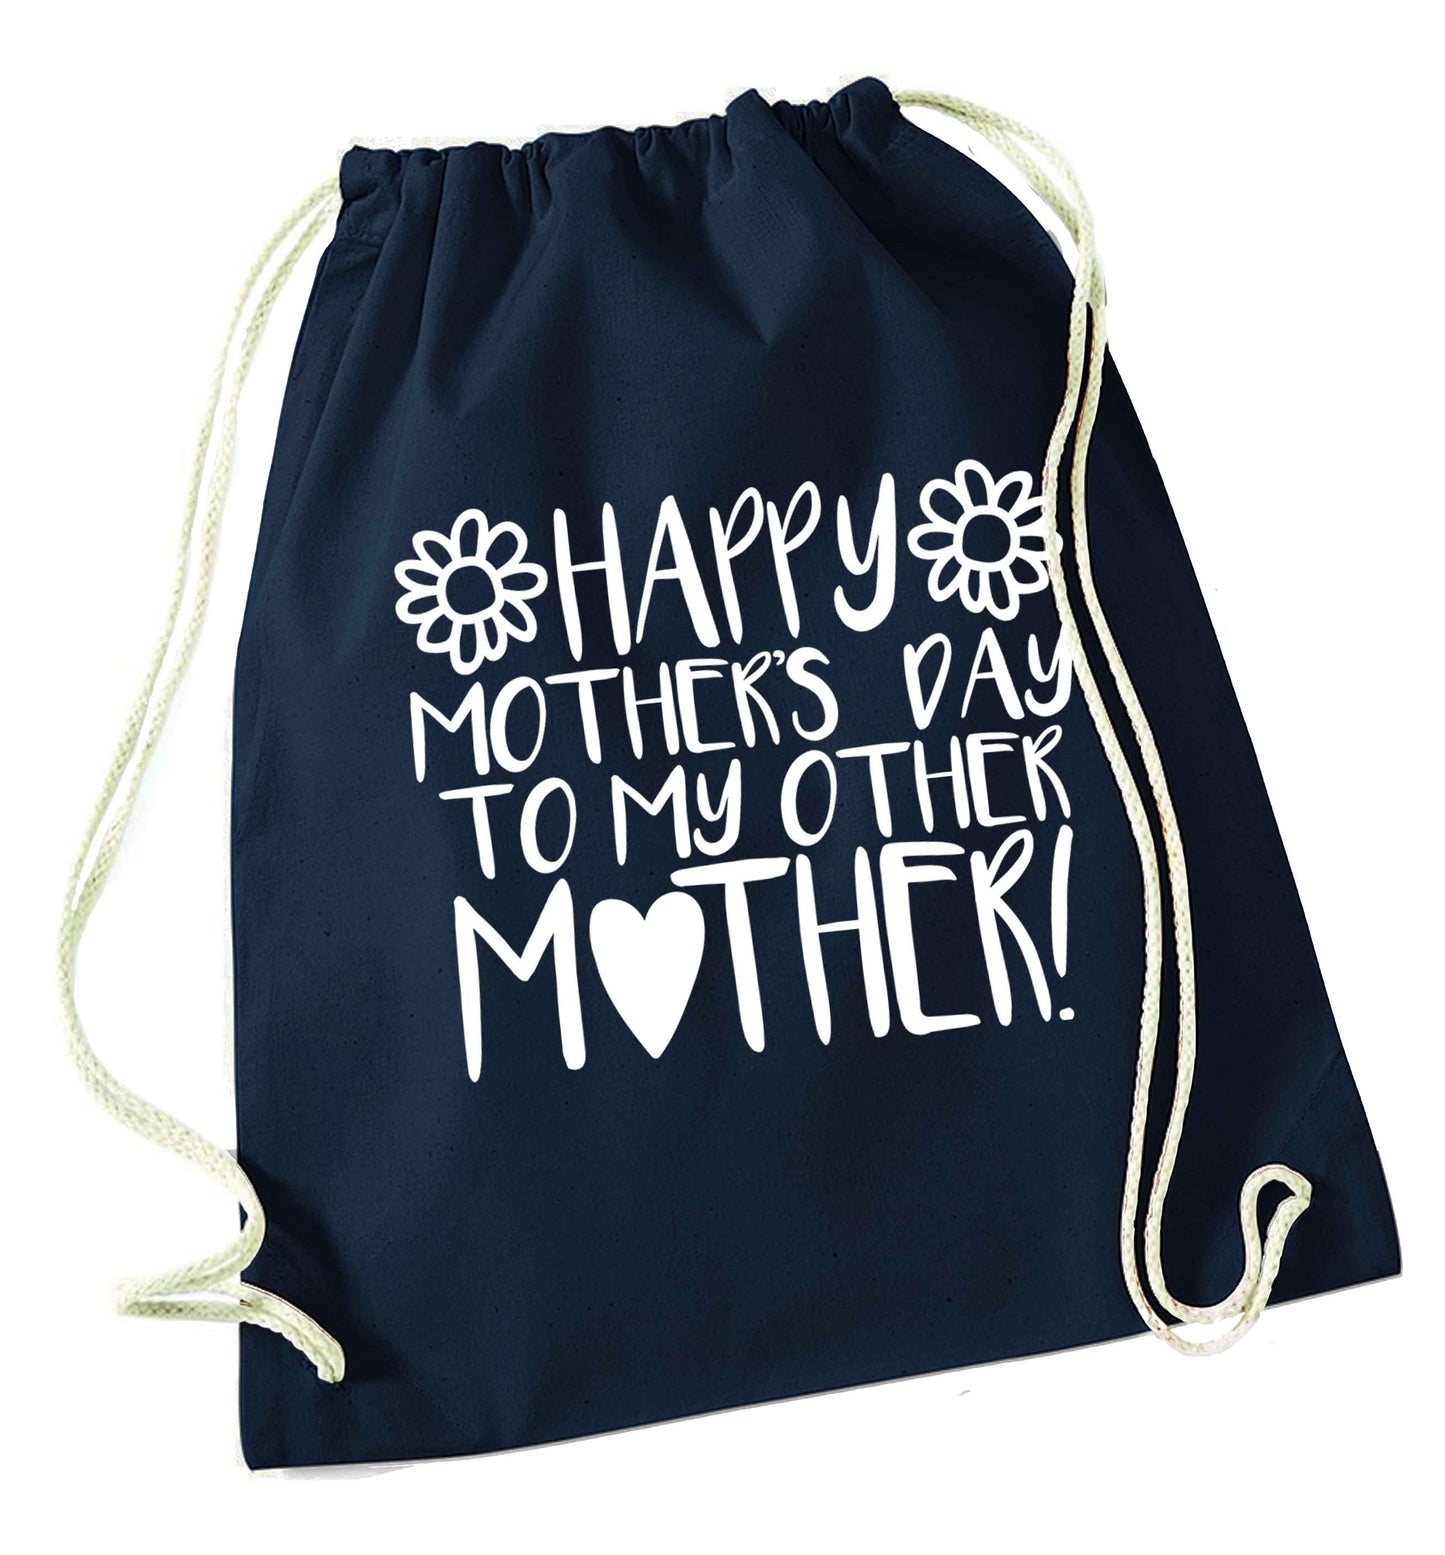 Happy mother's day to my other mother navy drawstring bag